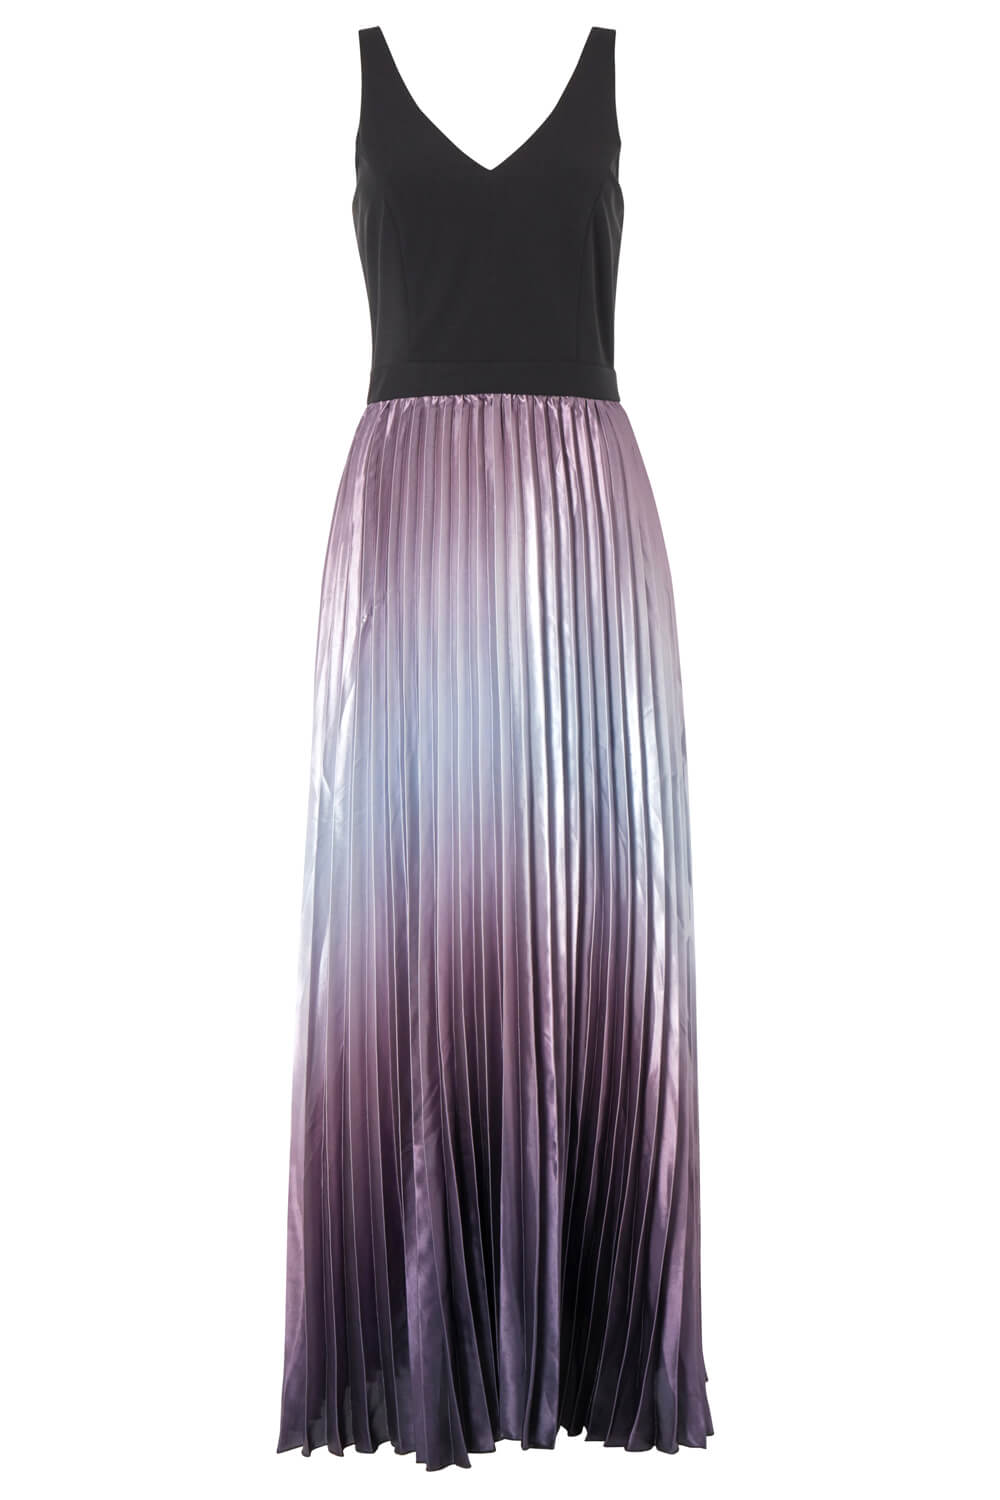 Purple Ombre Satin Pleated Maxi Dress, Image 5 of 5